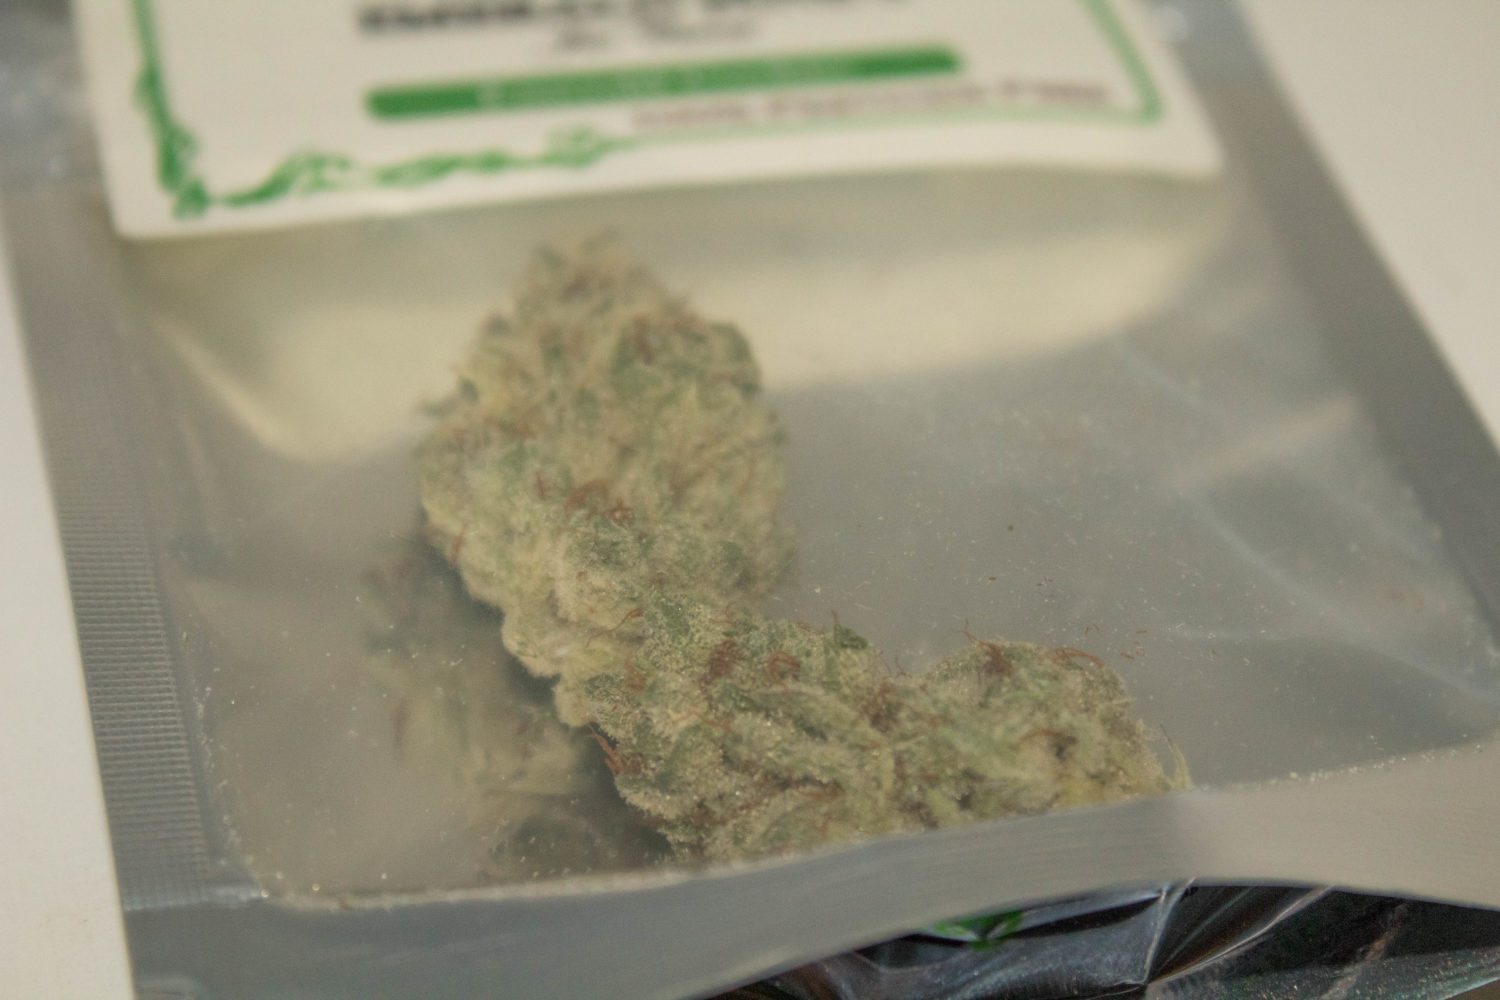 A Real Review Of The Emerald Cookies Strain From Emerald Janes